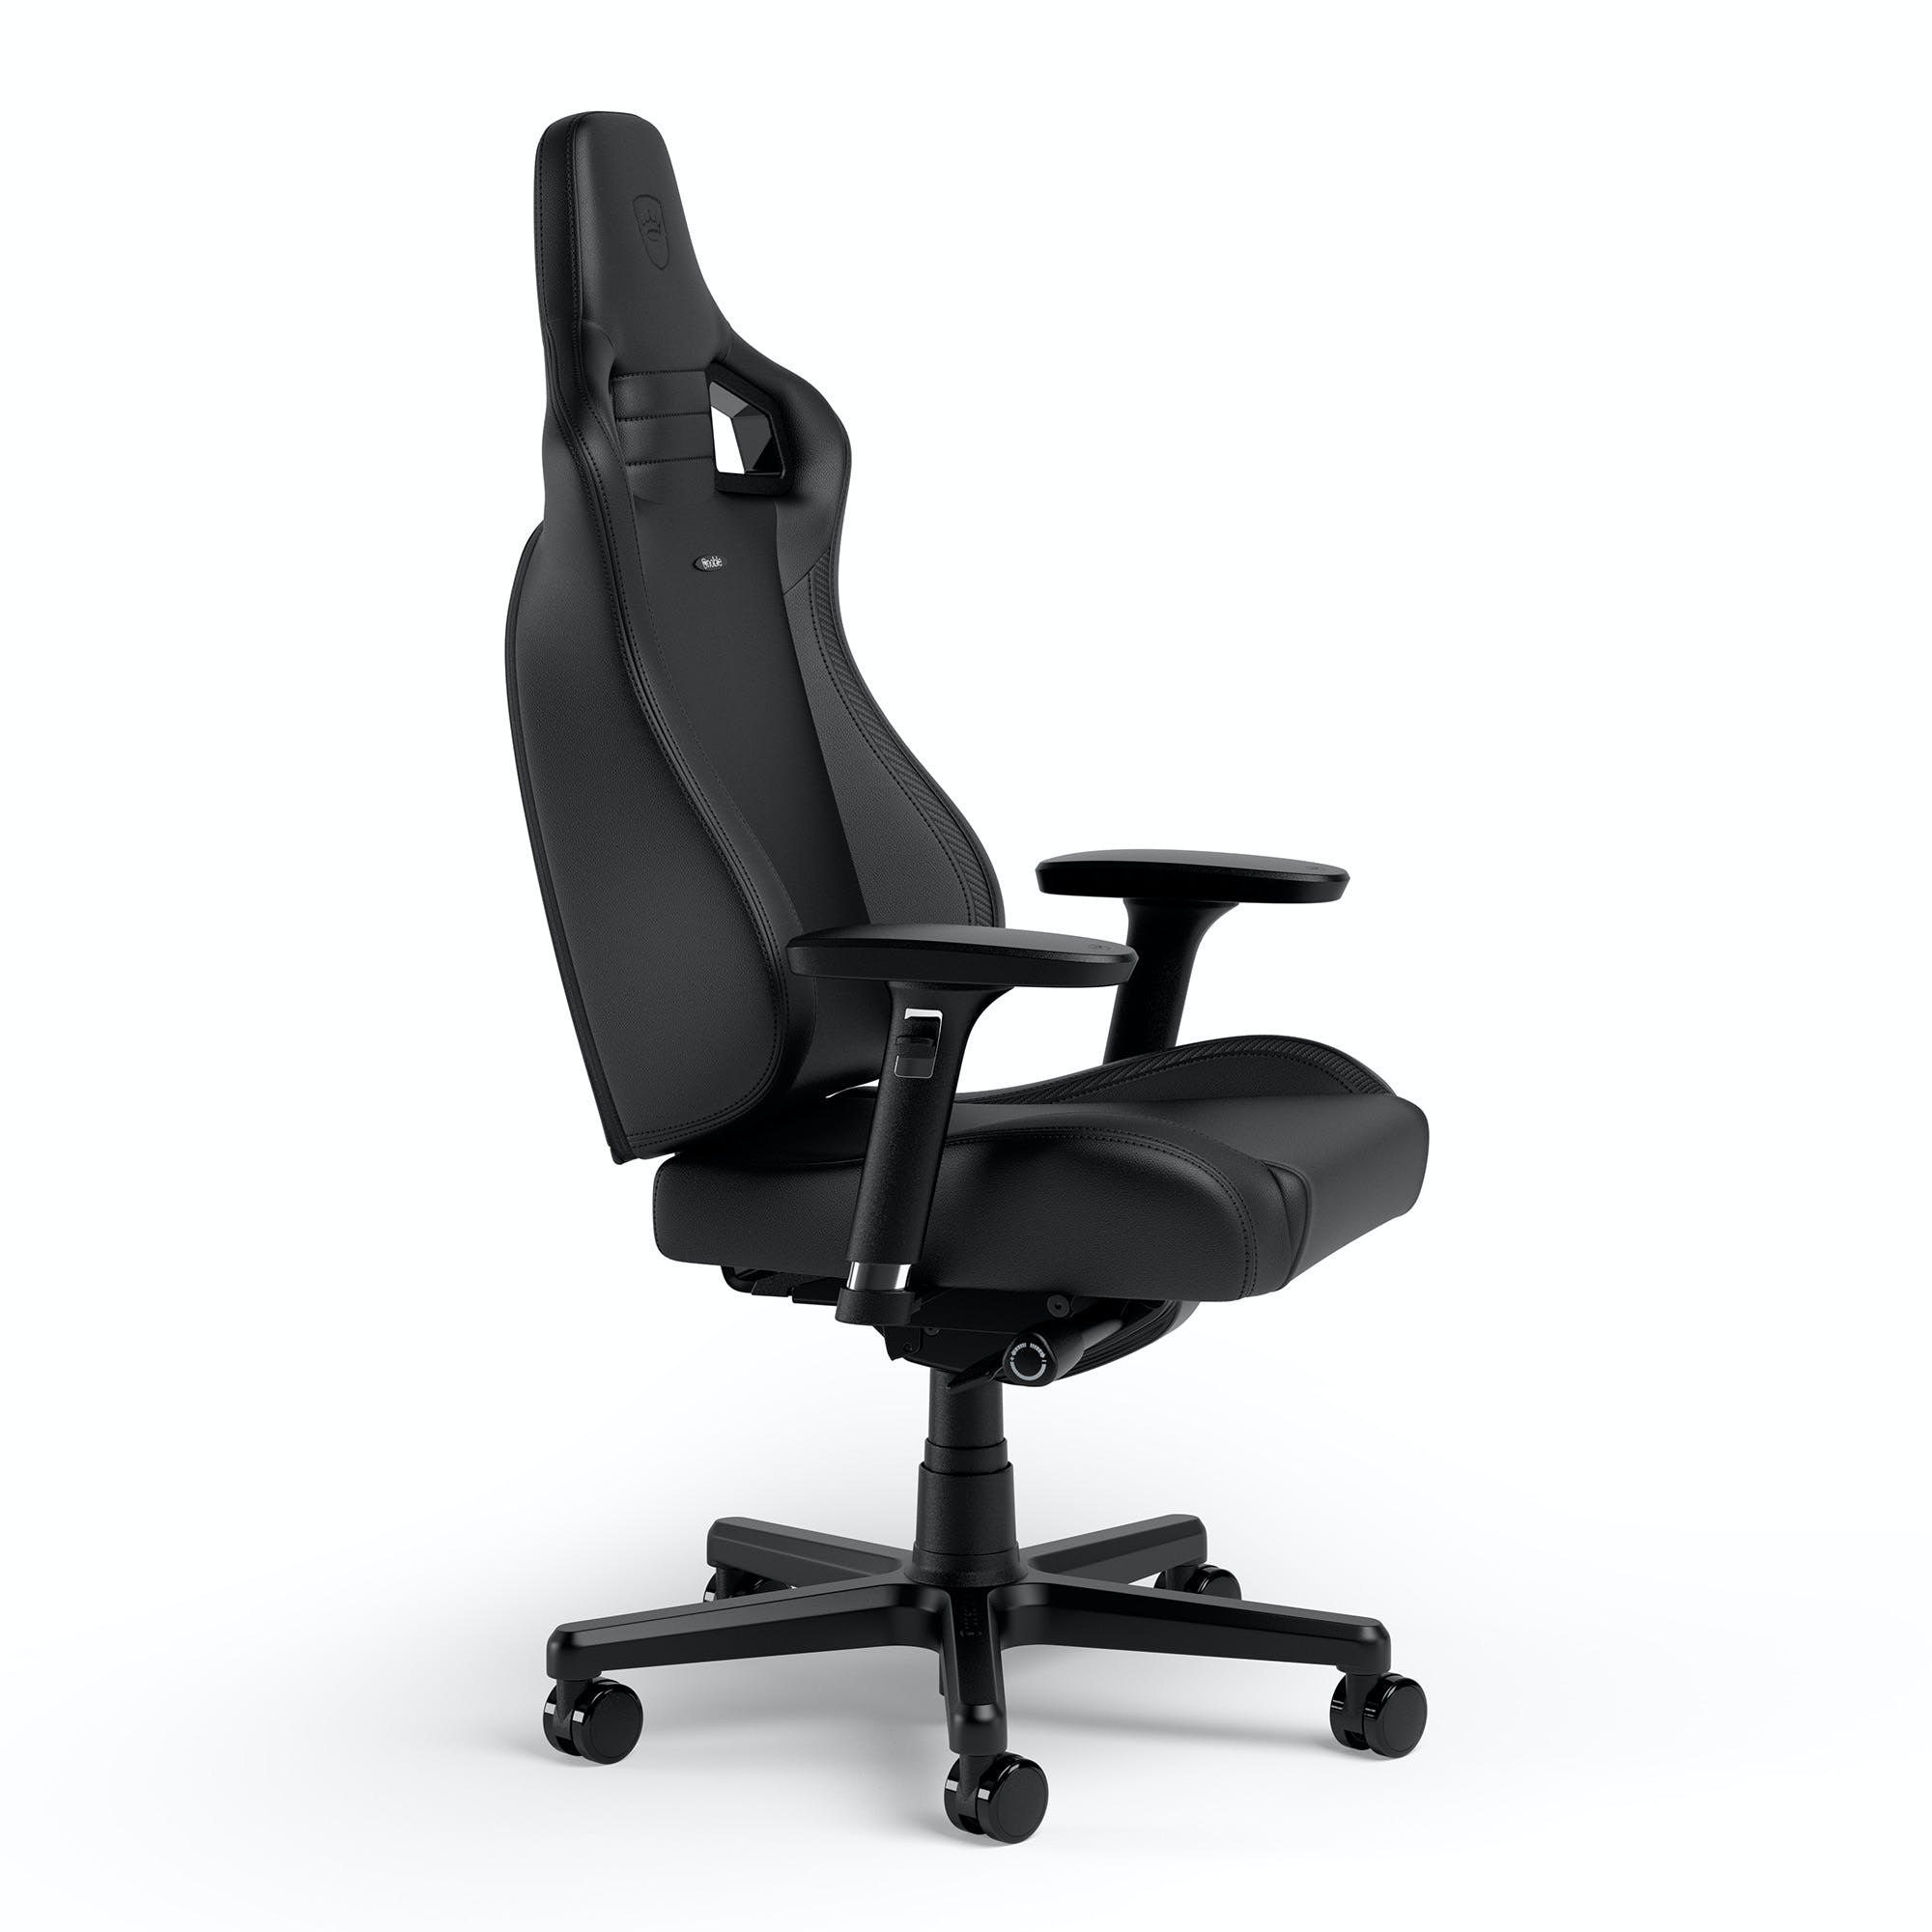 noblechairs - noblechairs EPIC Compact Gaming Chair - Carbon/Black